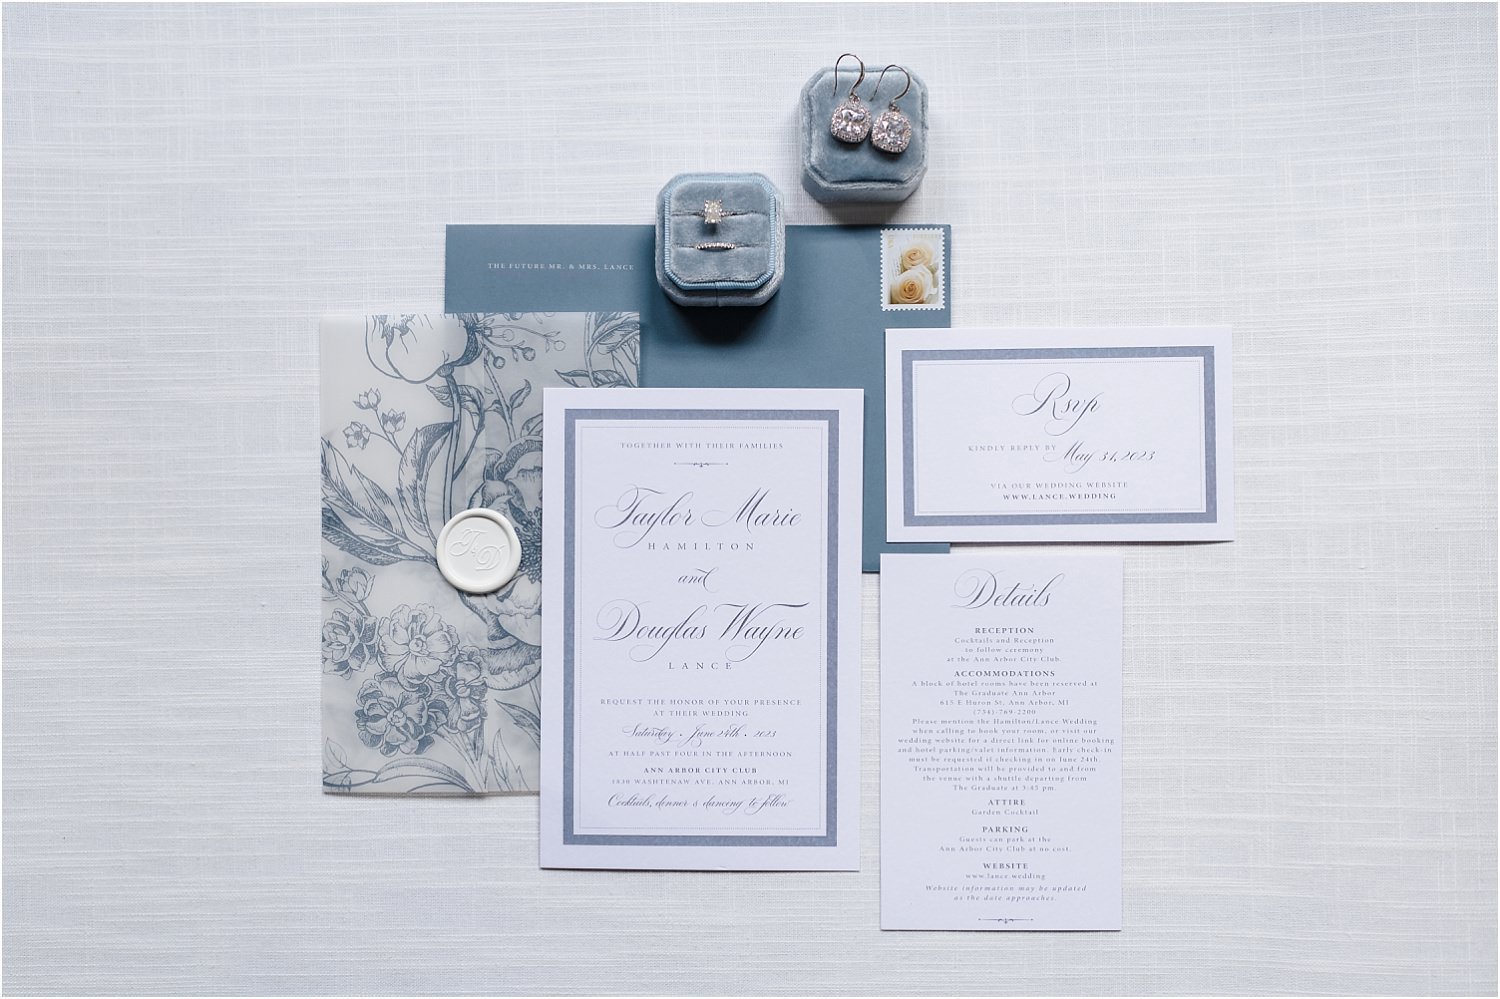  A blue and white wedding layflat with a floral invite and jewelry.  